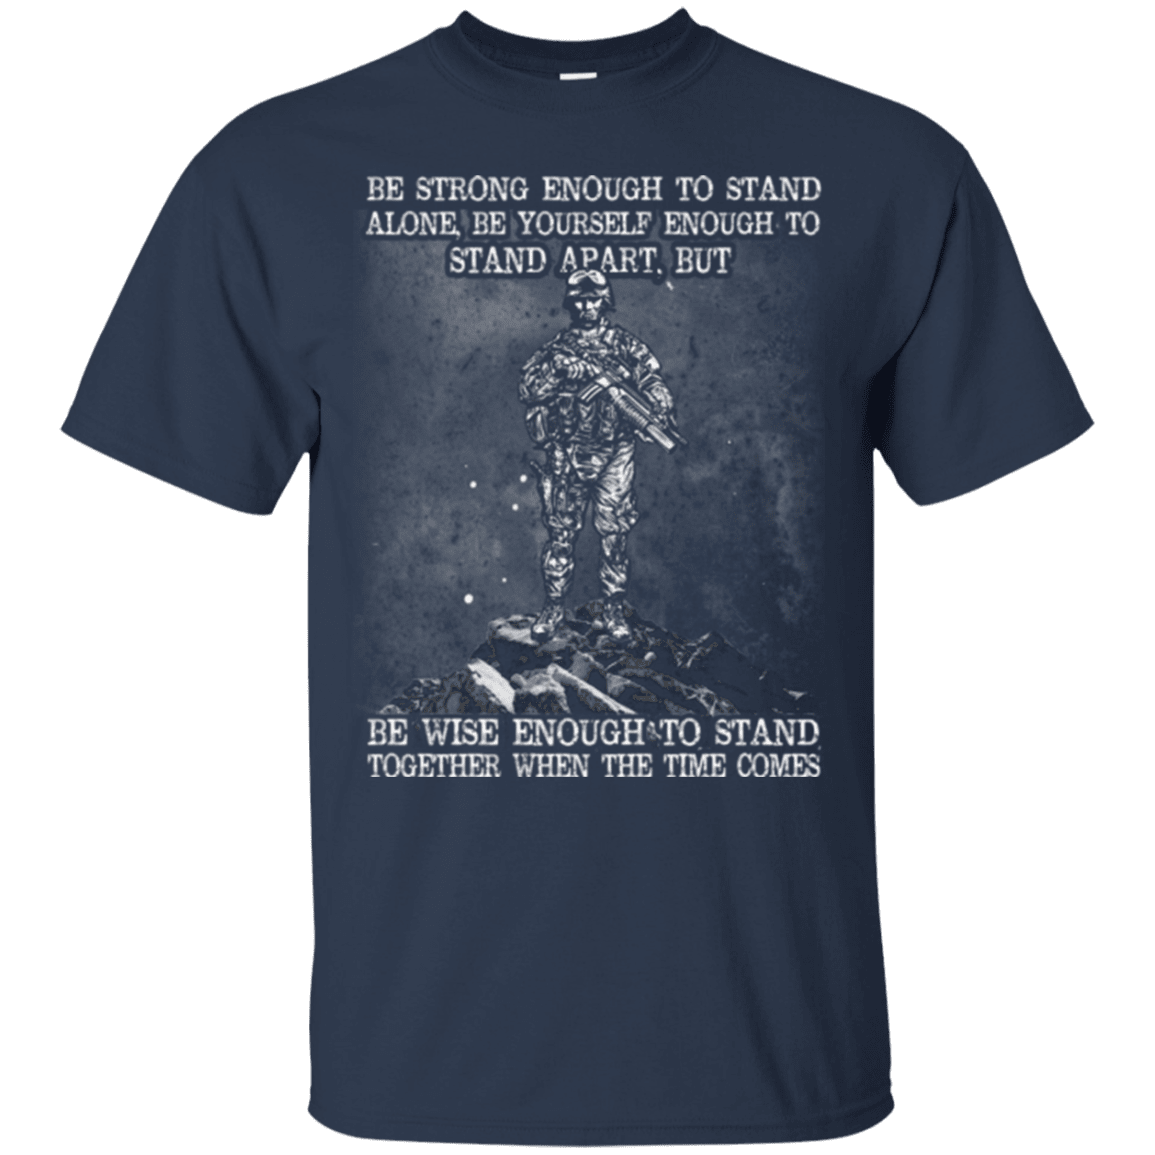 Military T-Shirt "STRONG ENOUGH TO STAND TOGETHER"-TShirt-General-Veterans Nation